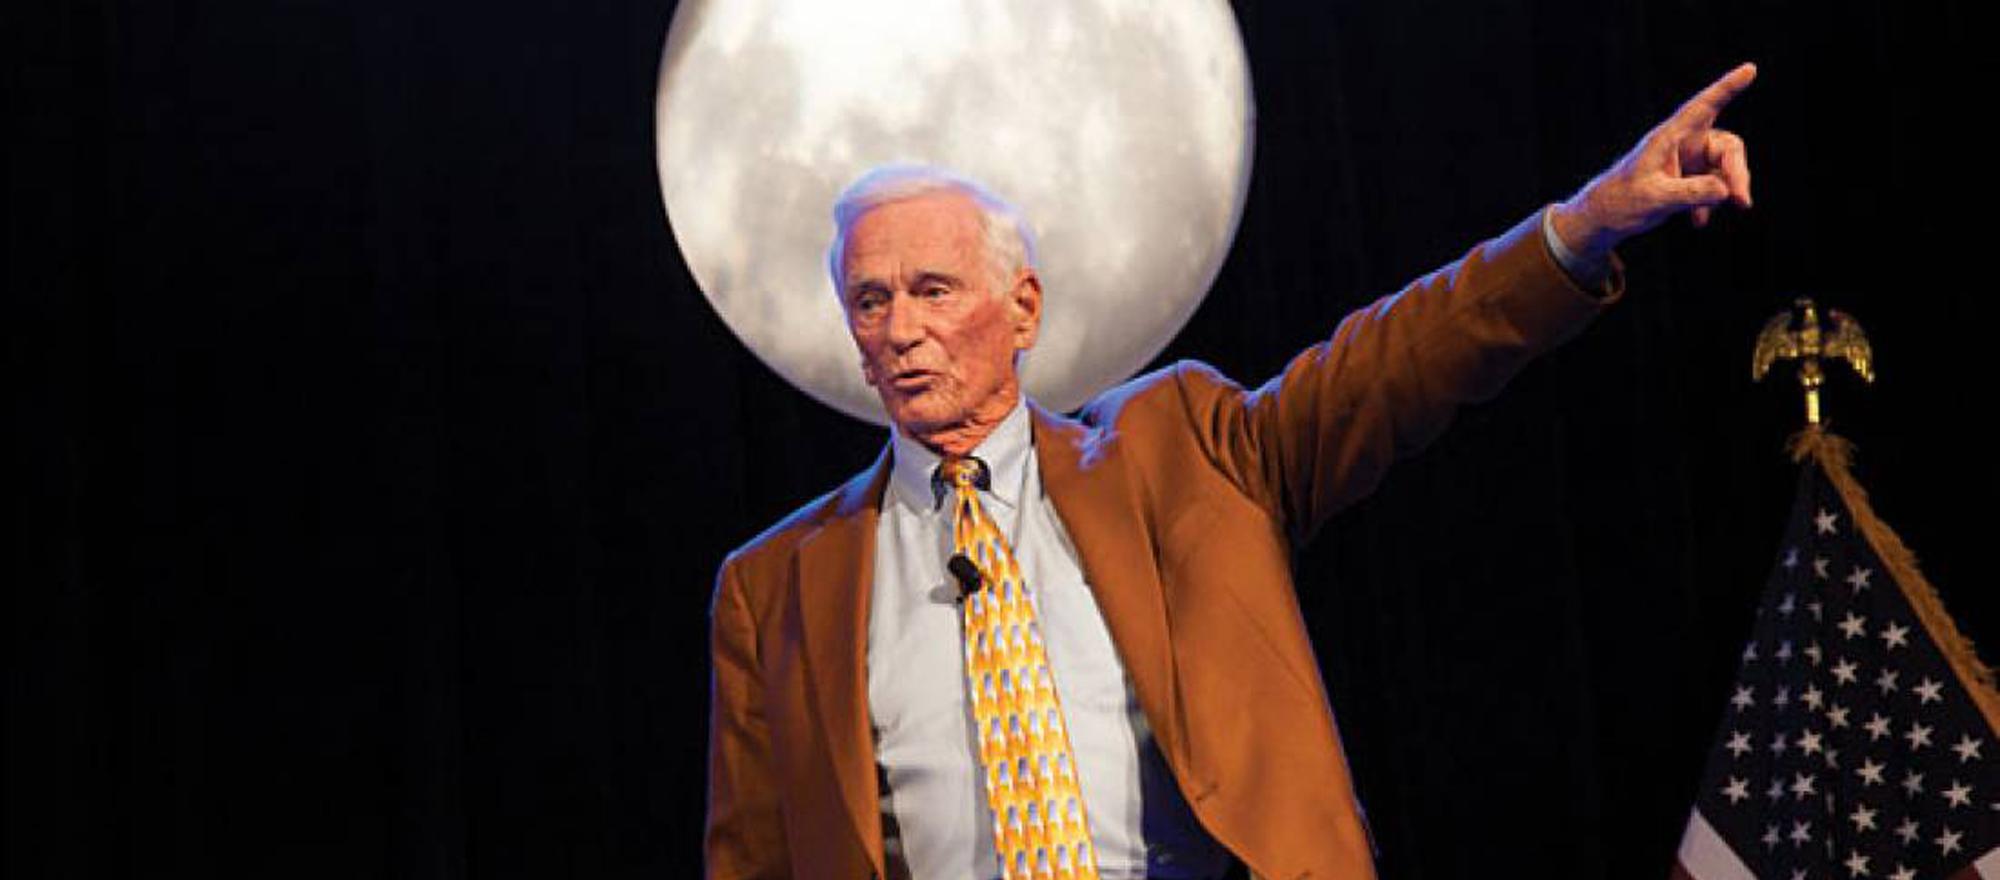 Gene Cernan belonged to an elite club: he flew to the Moon twice and was the last human to walk on its surface, in December 1972.